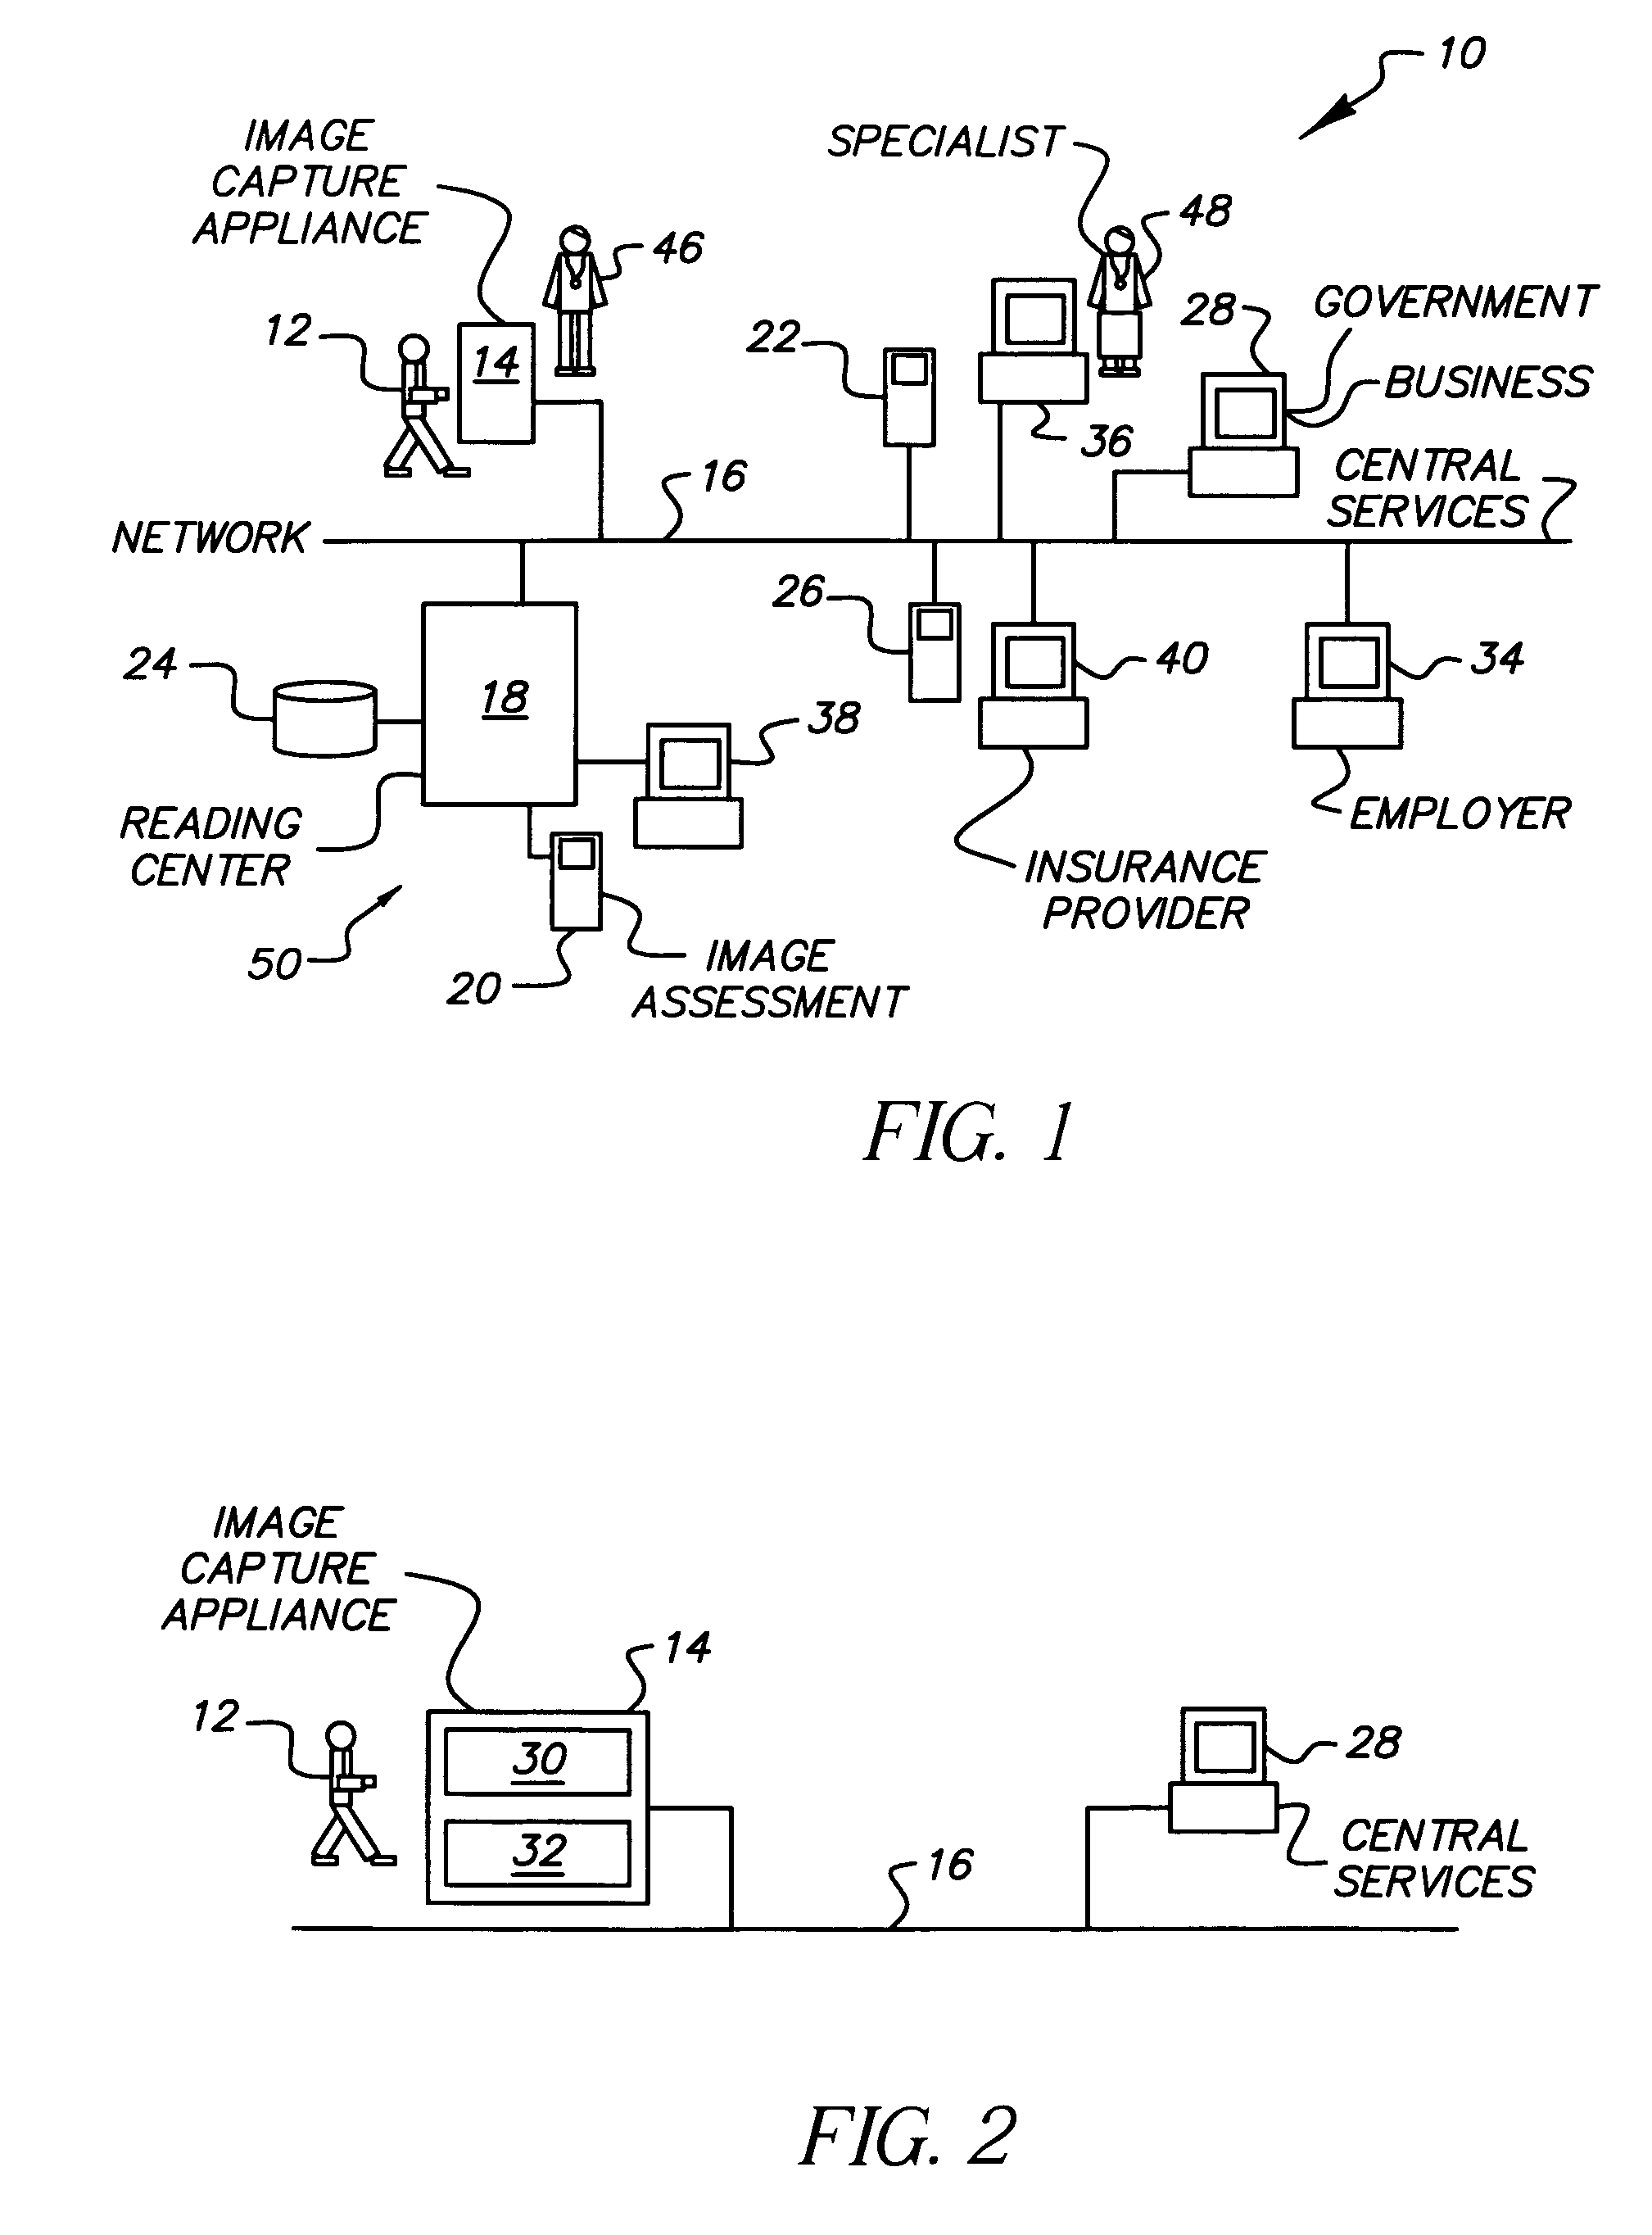 Networked system for routing medical images